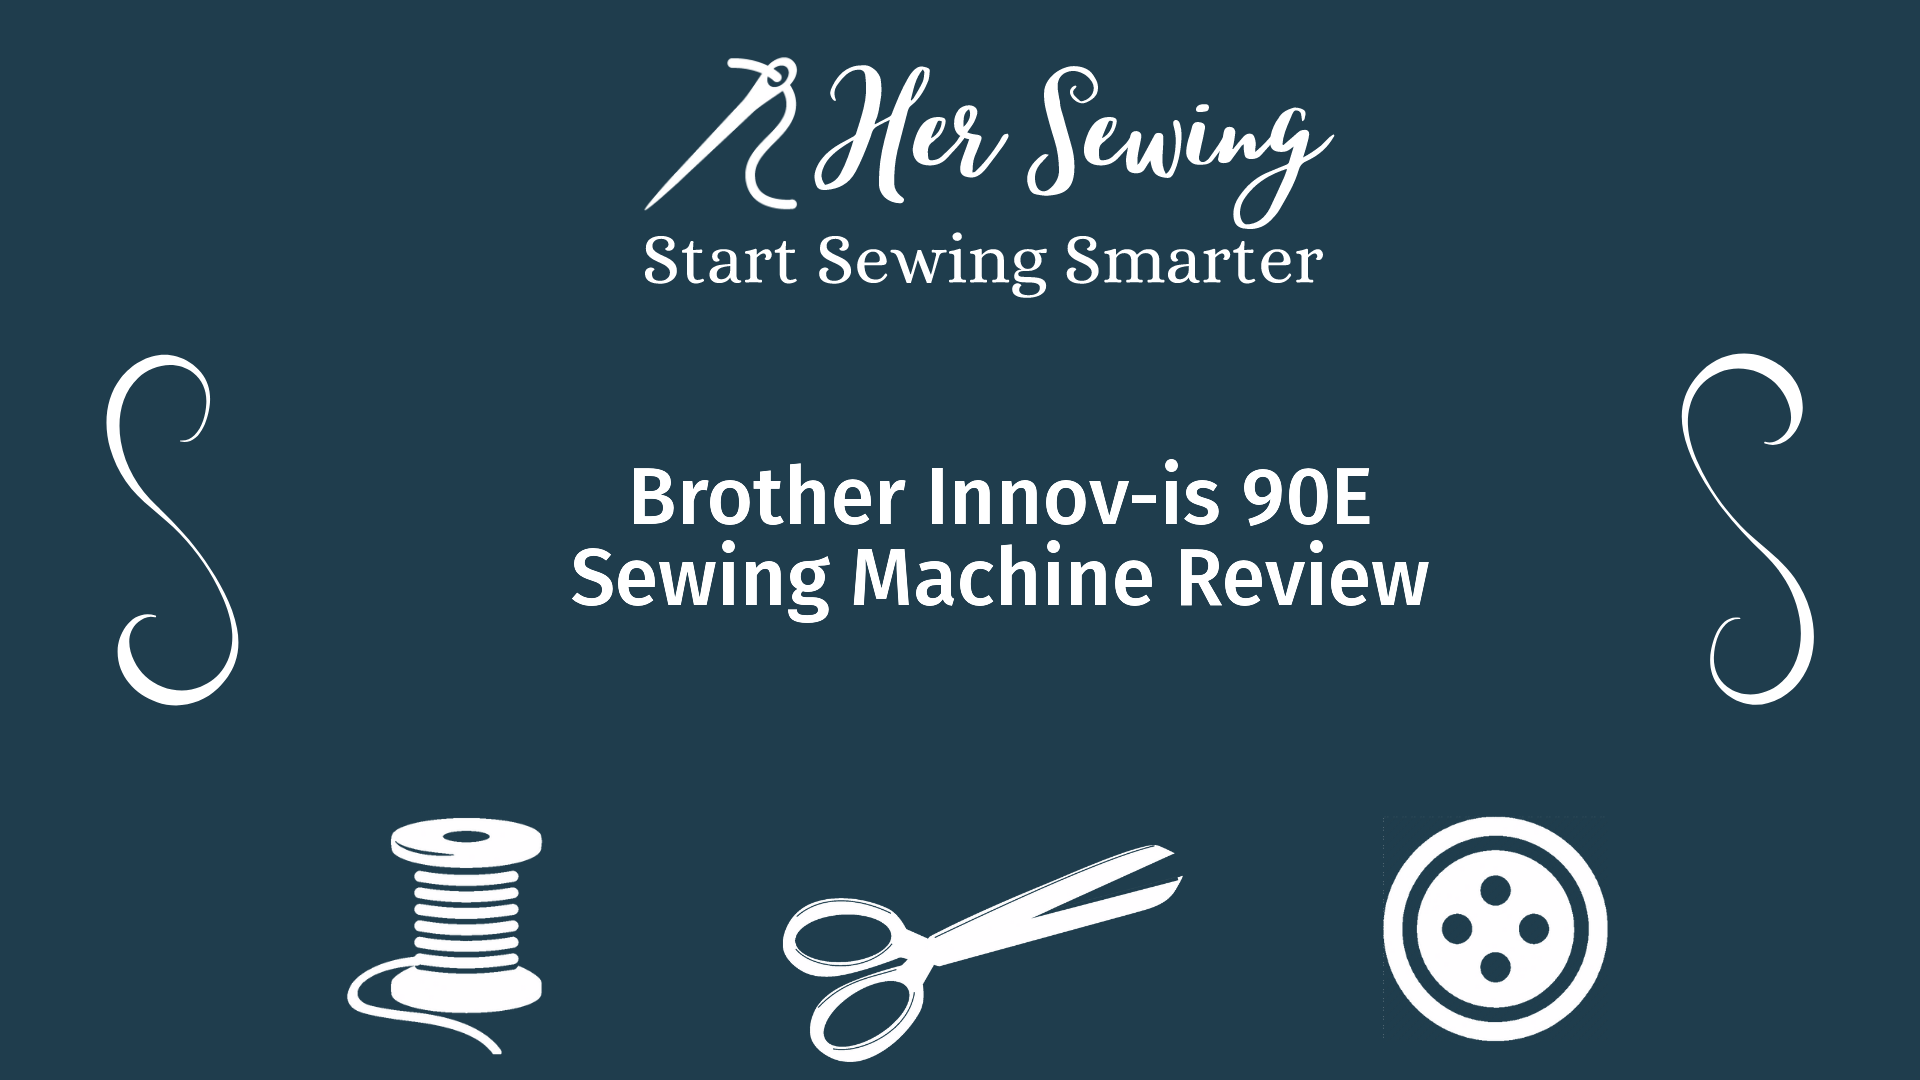 Brother Innov-is 90E Sewing Machine Review